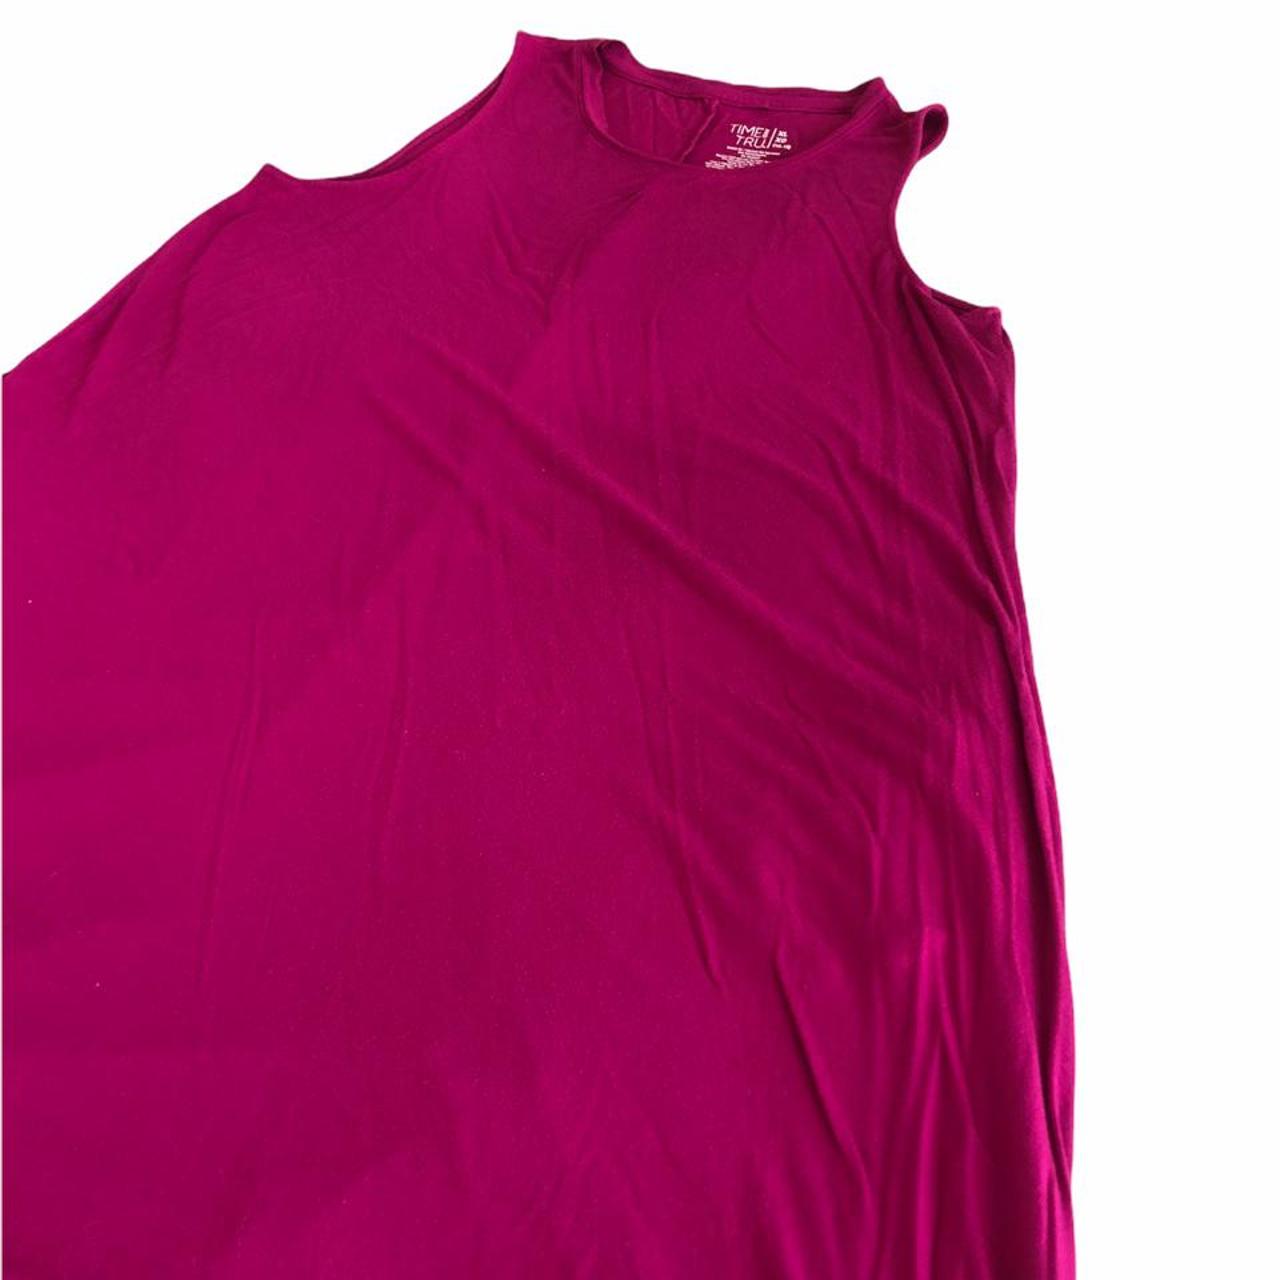 Product Image 1 - FREE US SHIPPING

Pink Time and